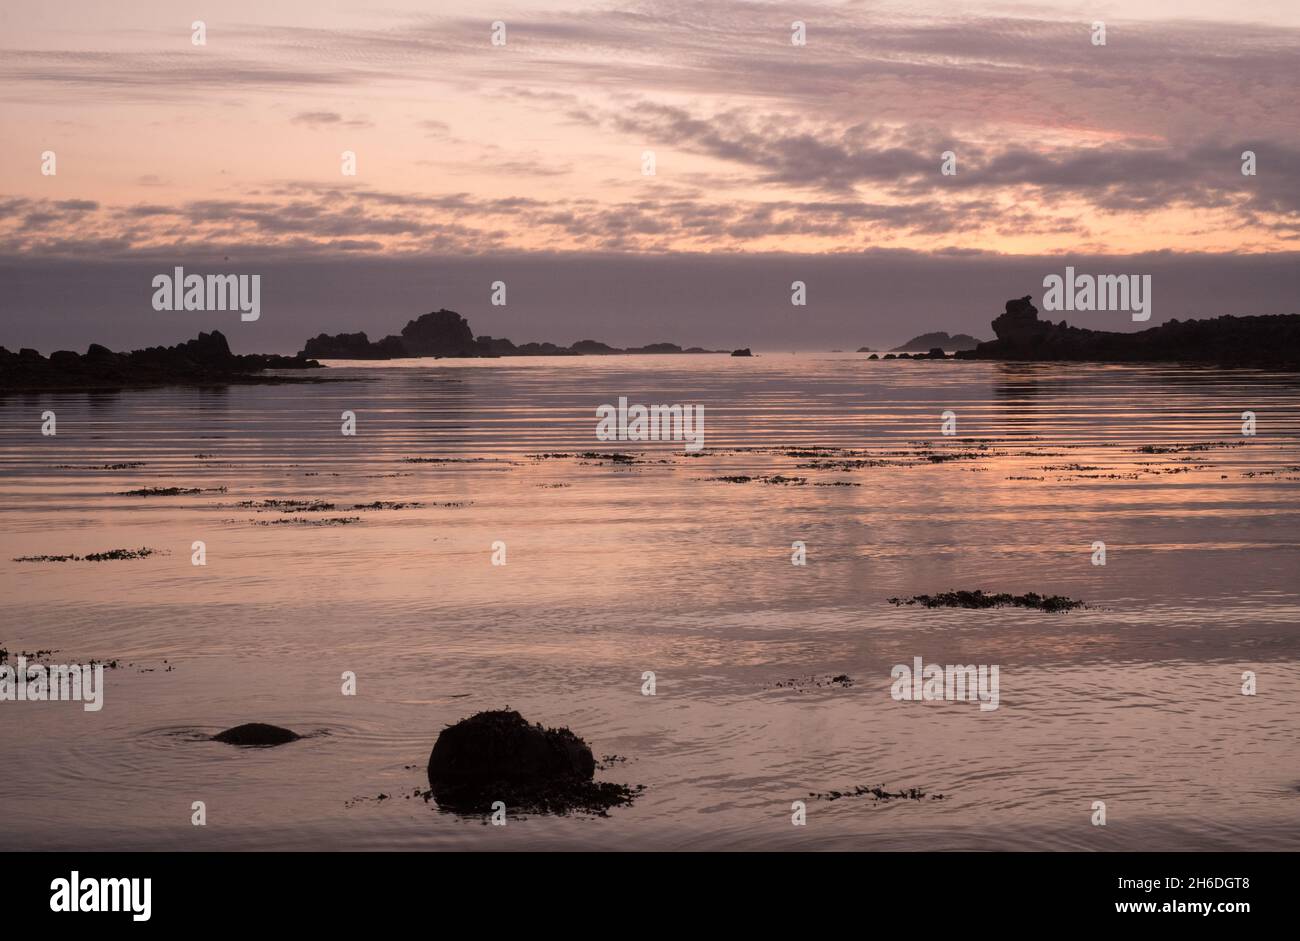 Sun setting over the rocks off Bryher, Isles of Scilly, viewed from Stony Par beach Stock Photo